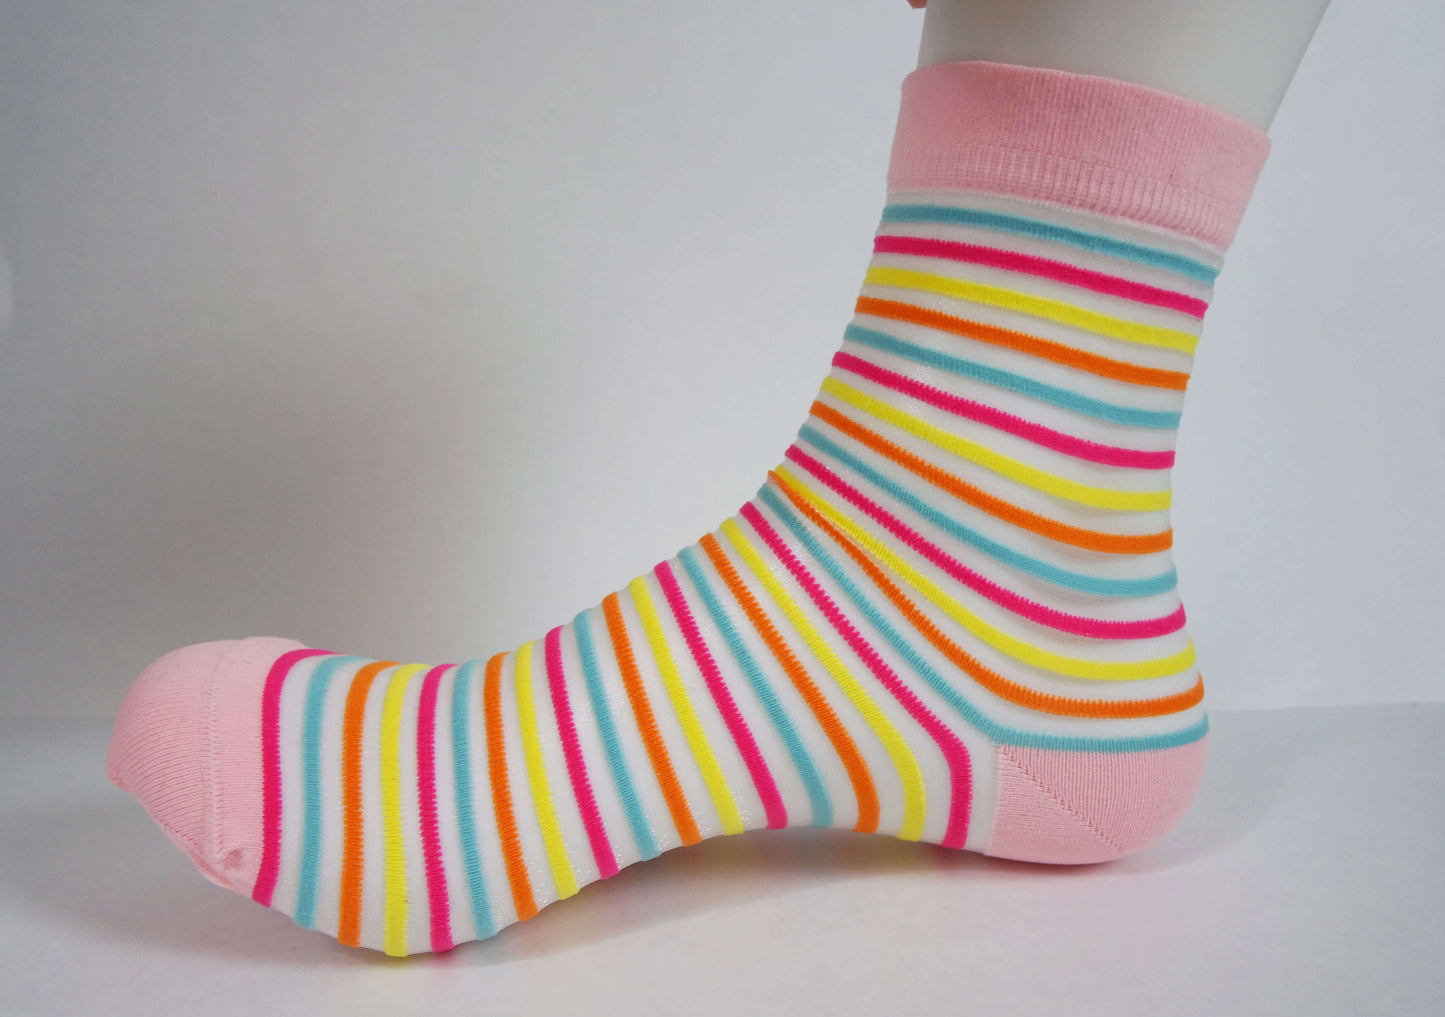 hic pink tones striped sheer socks for women, providing a versatile and trendy accessory